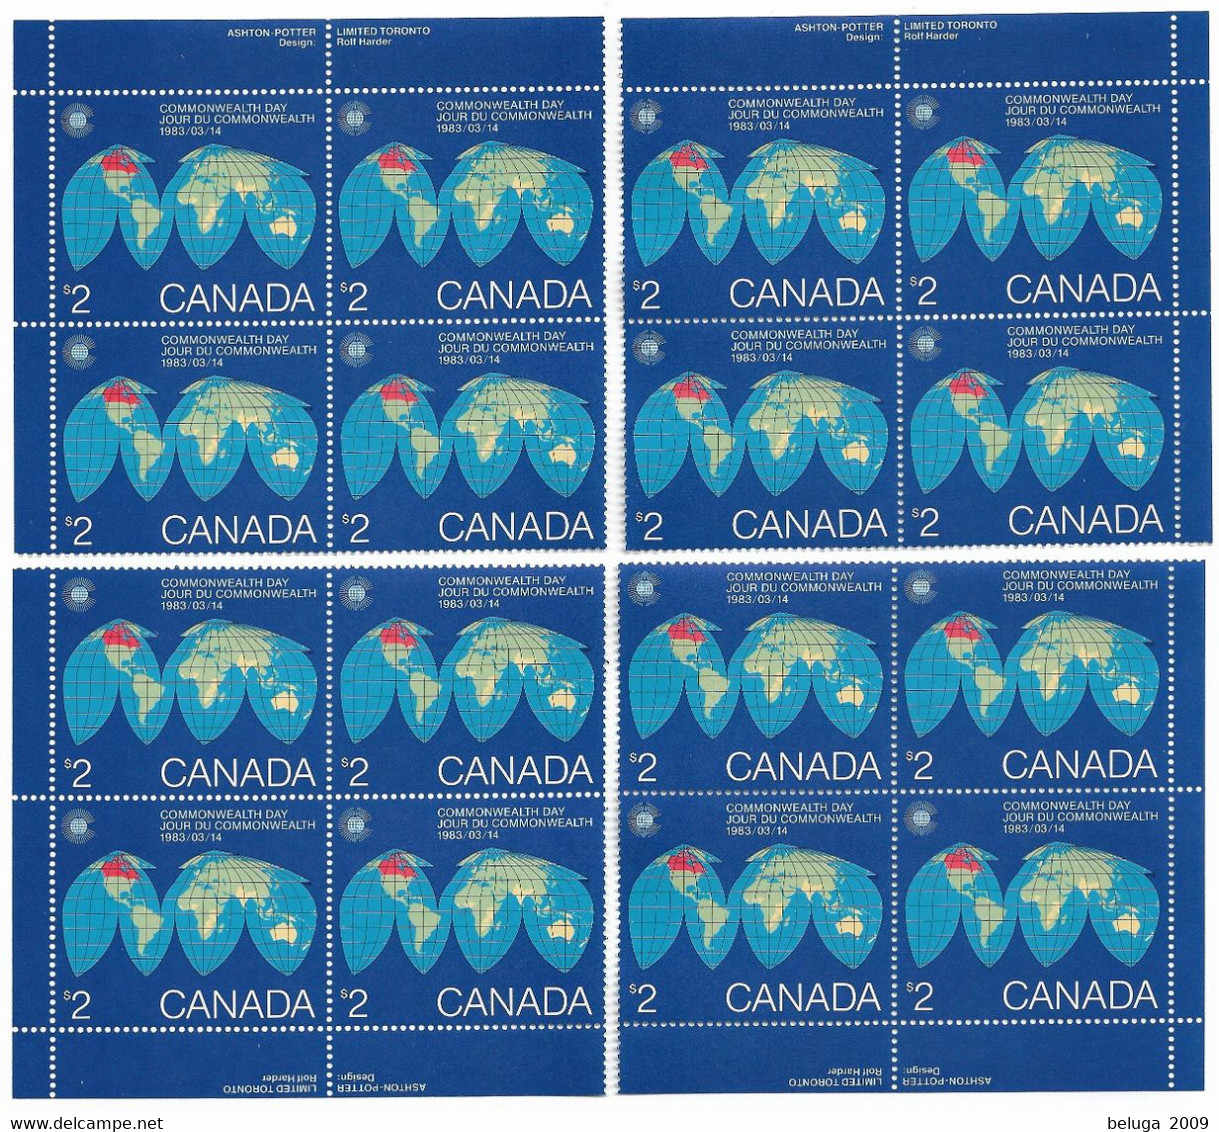 Canada 1983 #977 $2 Commonwealth Day - Map Of Earth 4 Corner Blocks MNH Cat $250 - Full Sheets & Multiples